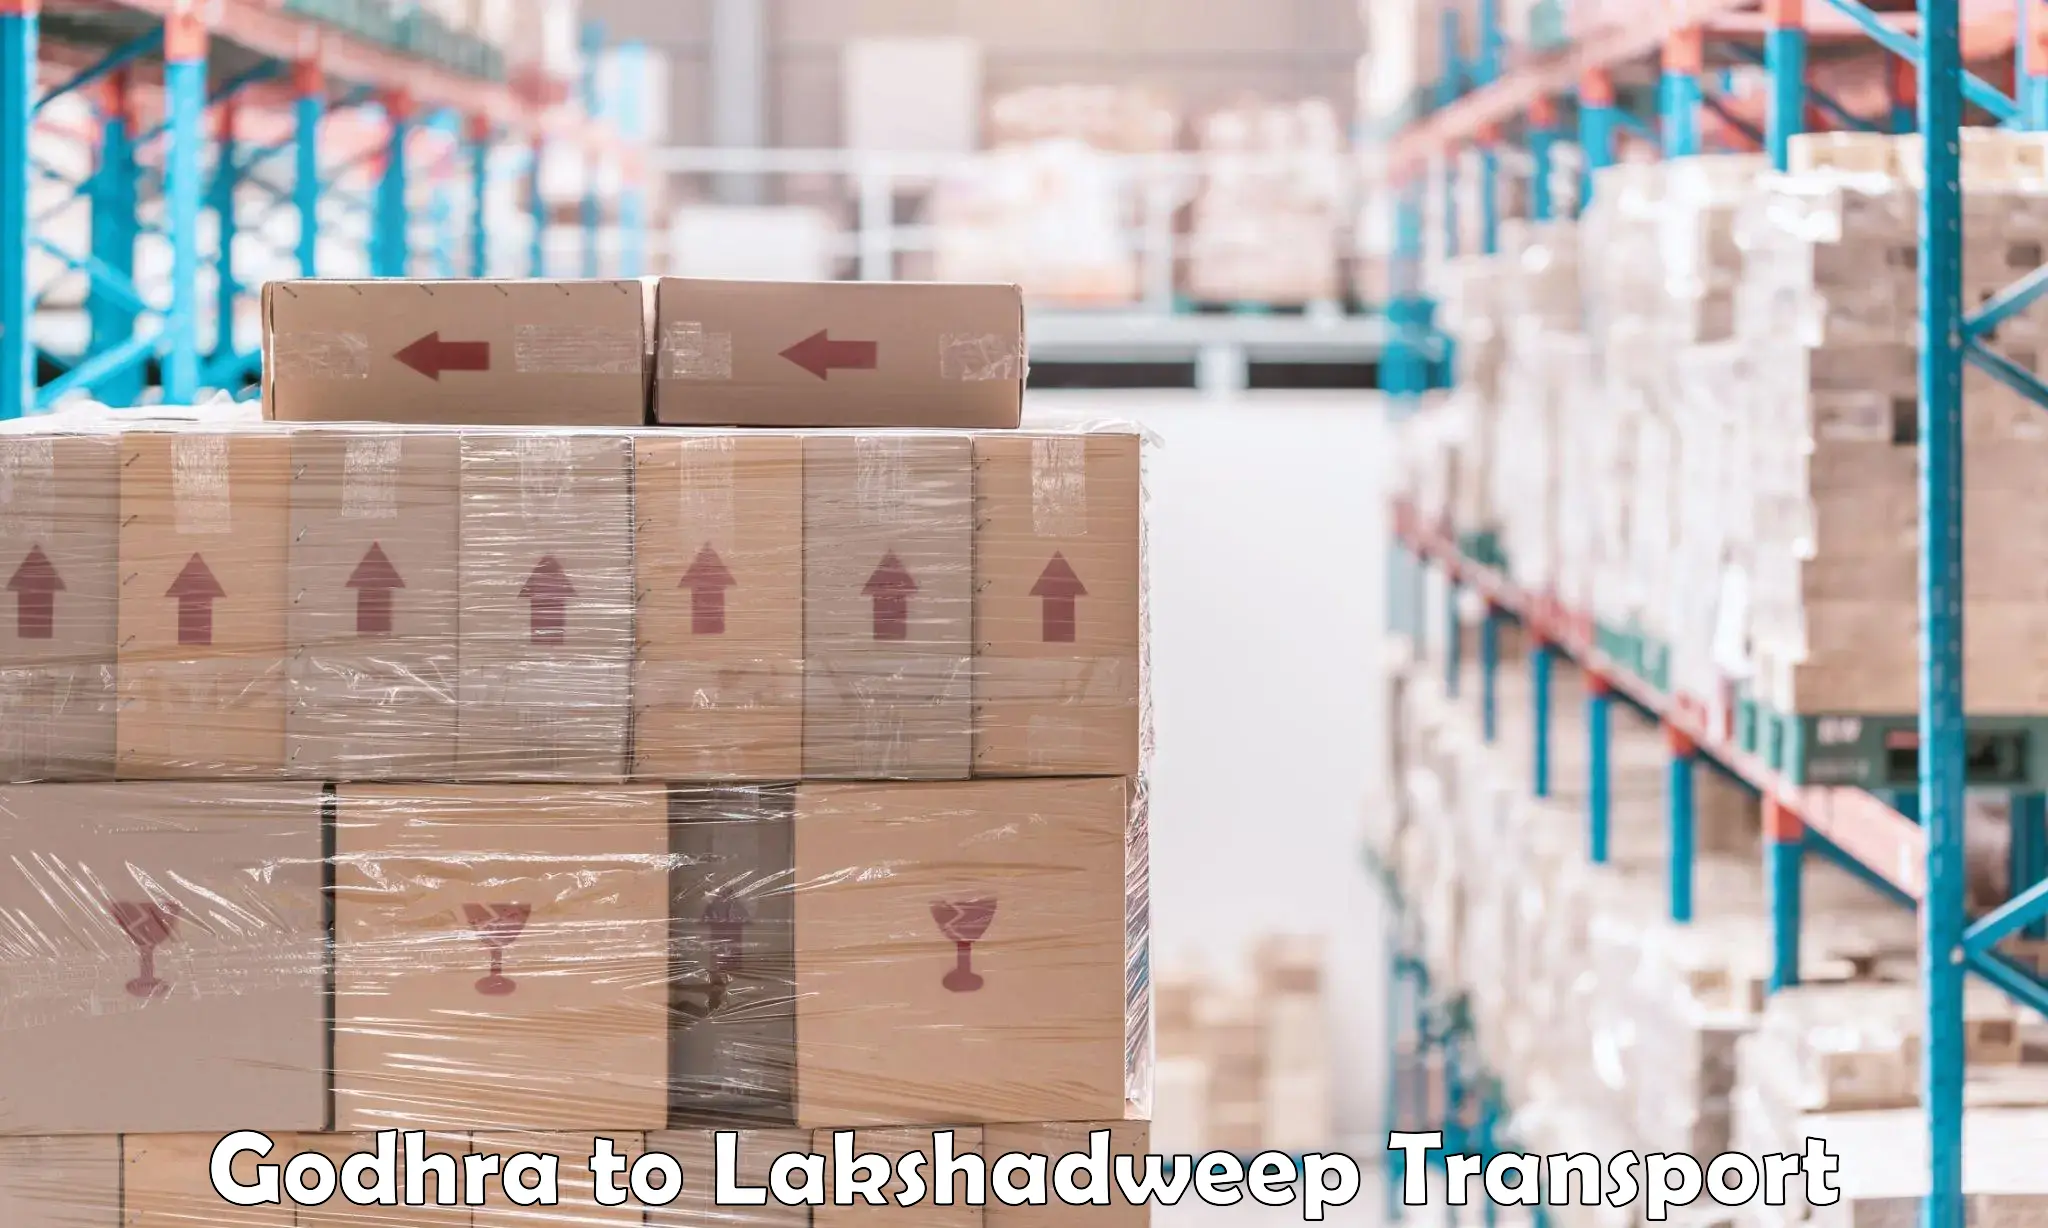 Commercial transport service Godhra to Lakshadweep